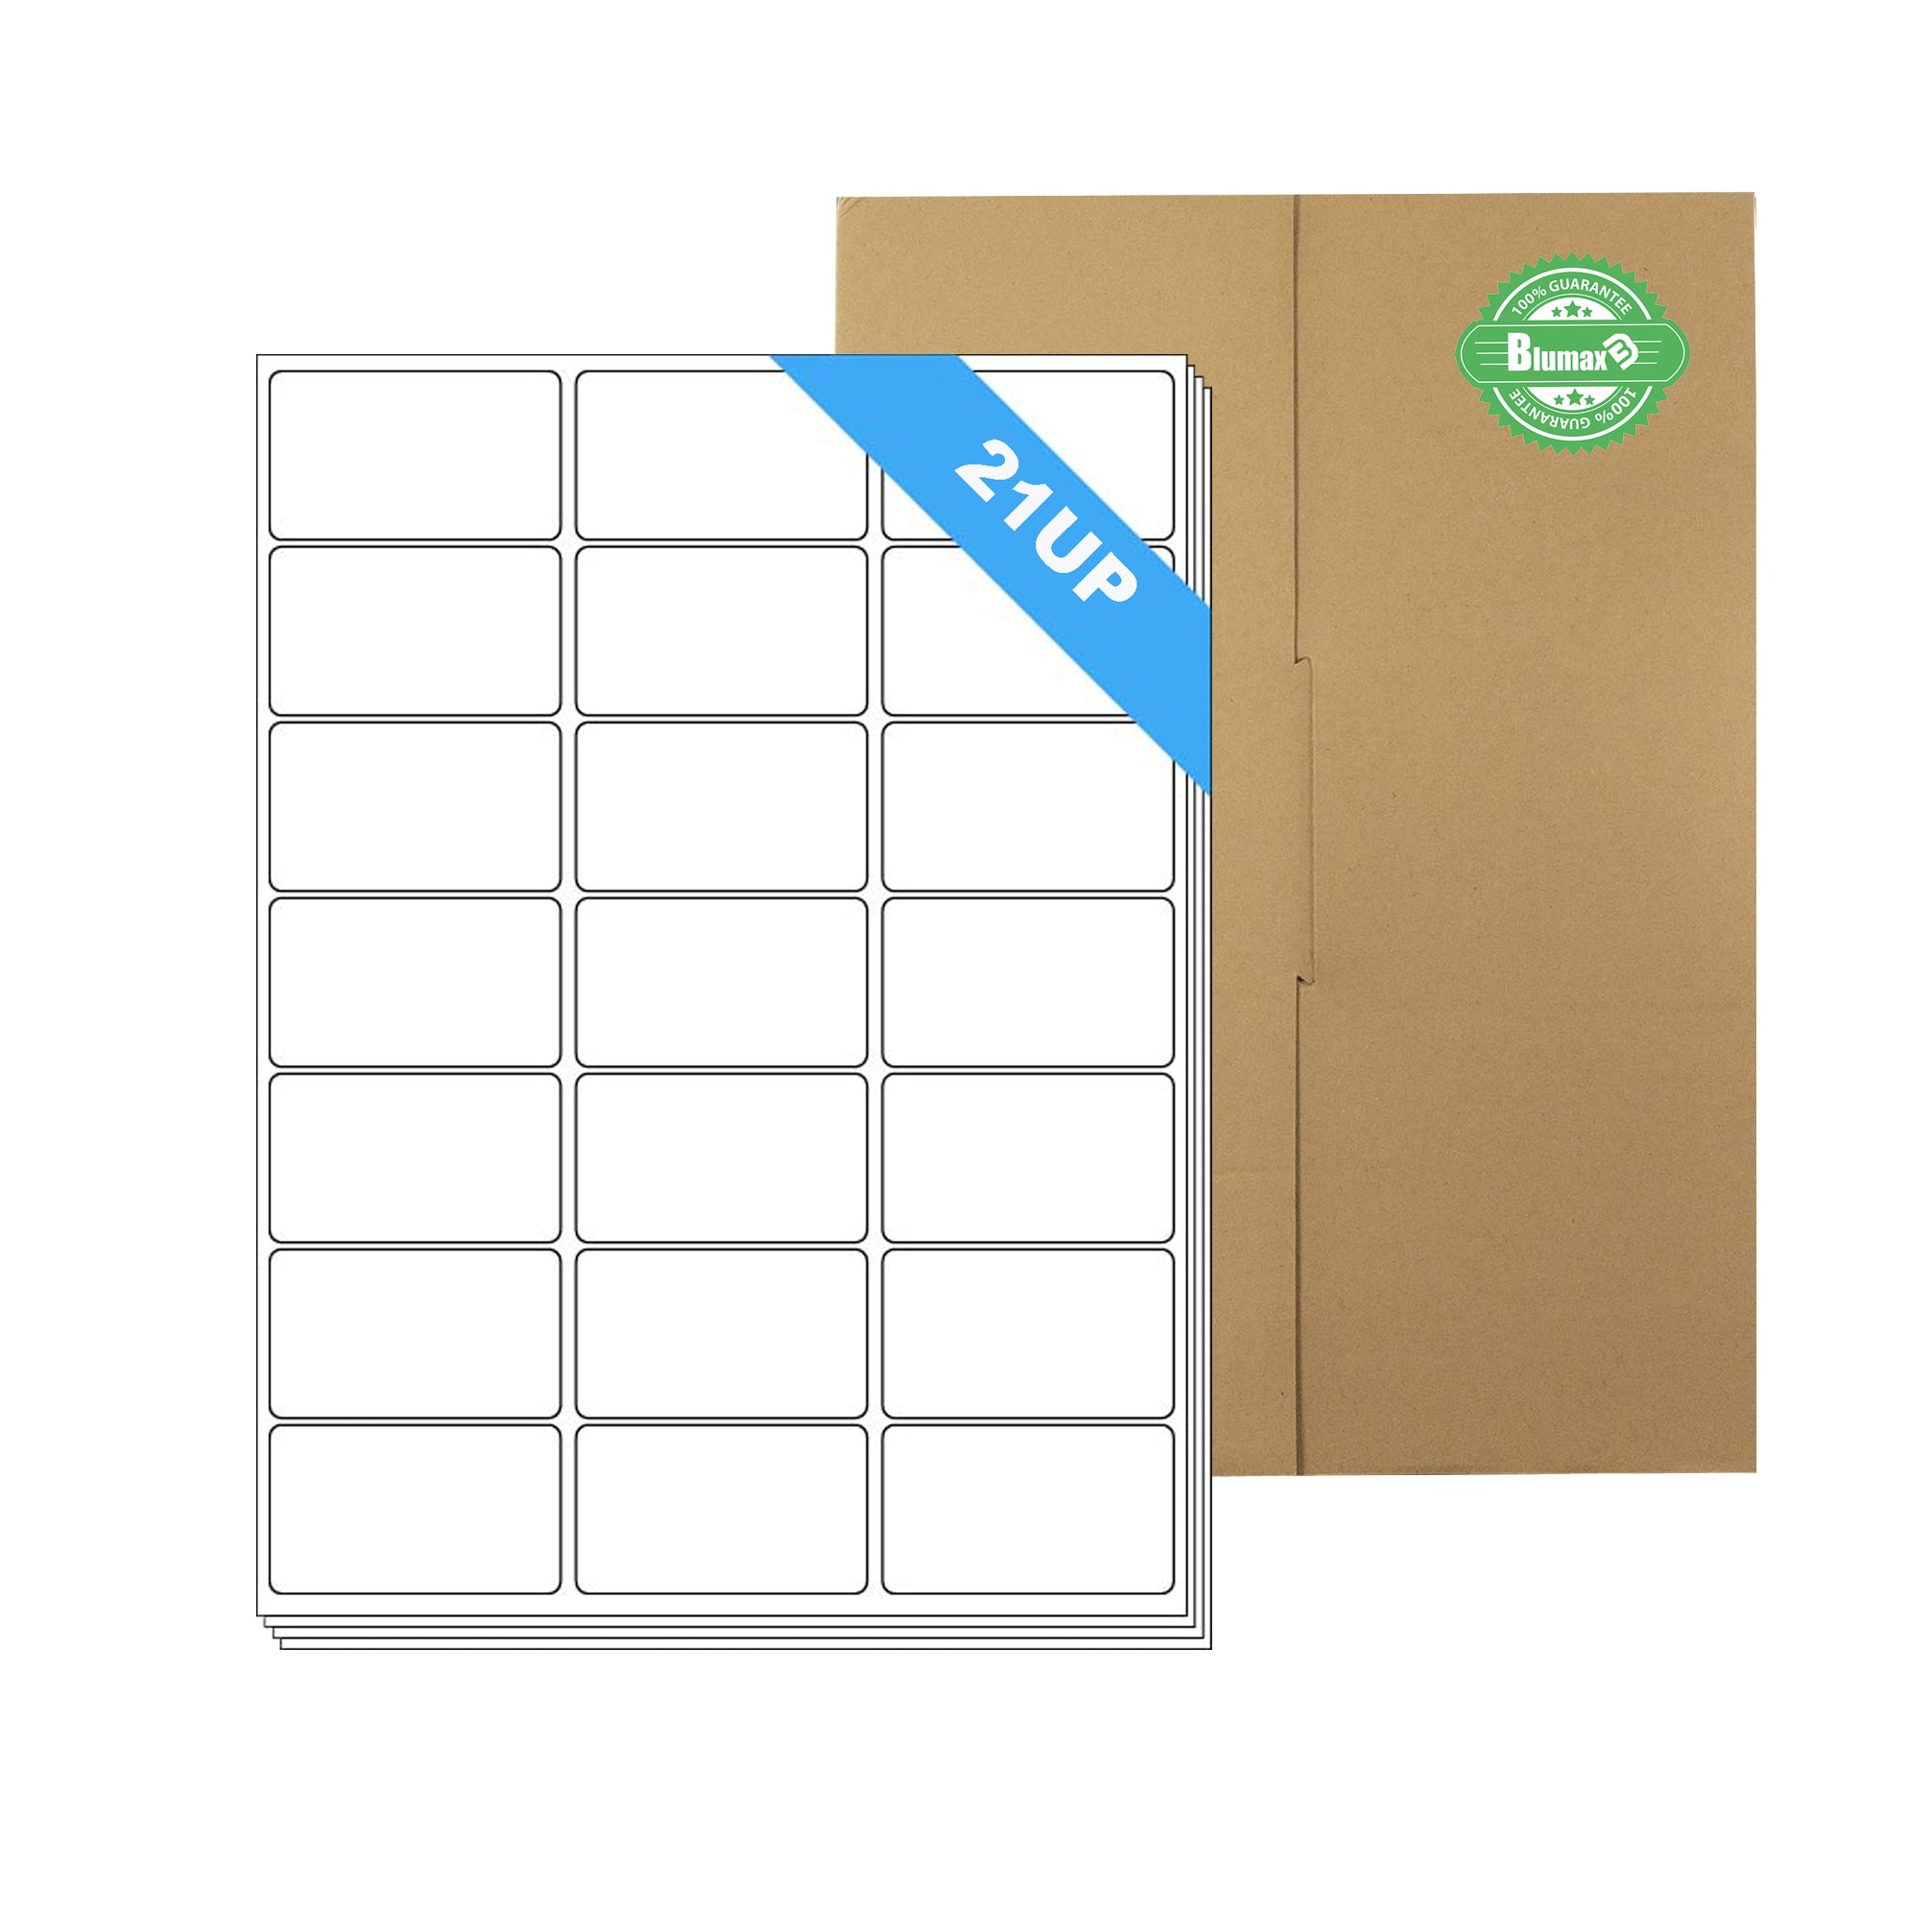 Print your artwork on US 21 label sheets